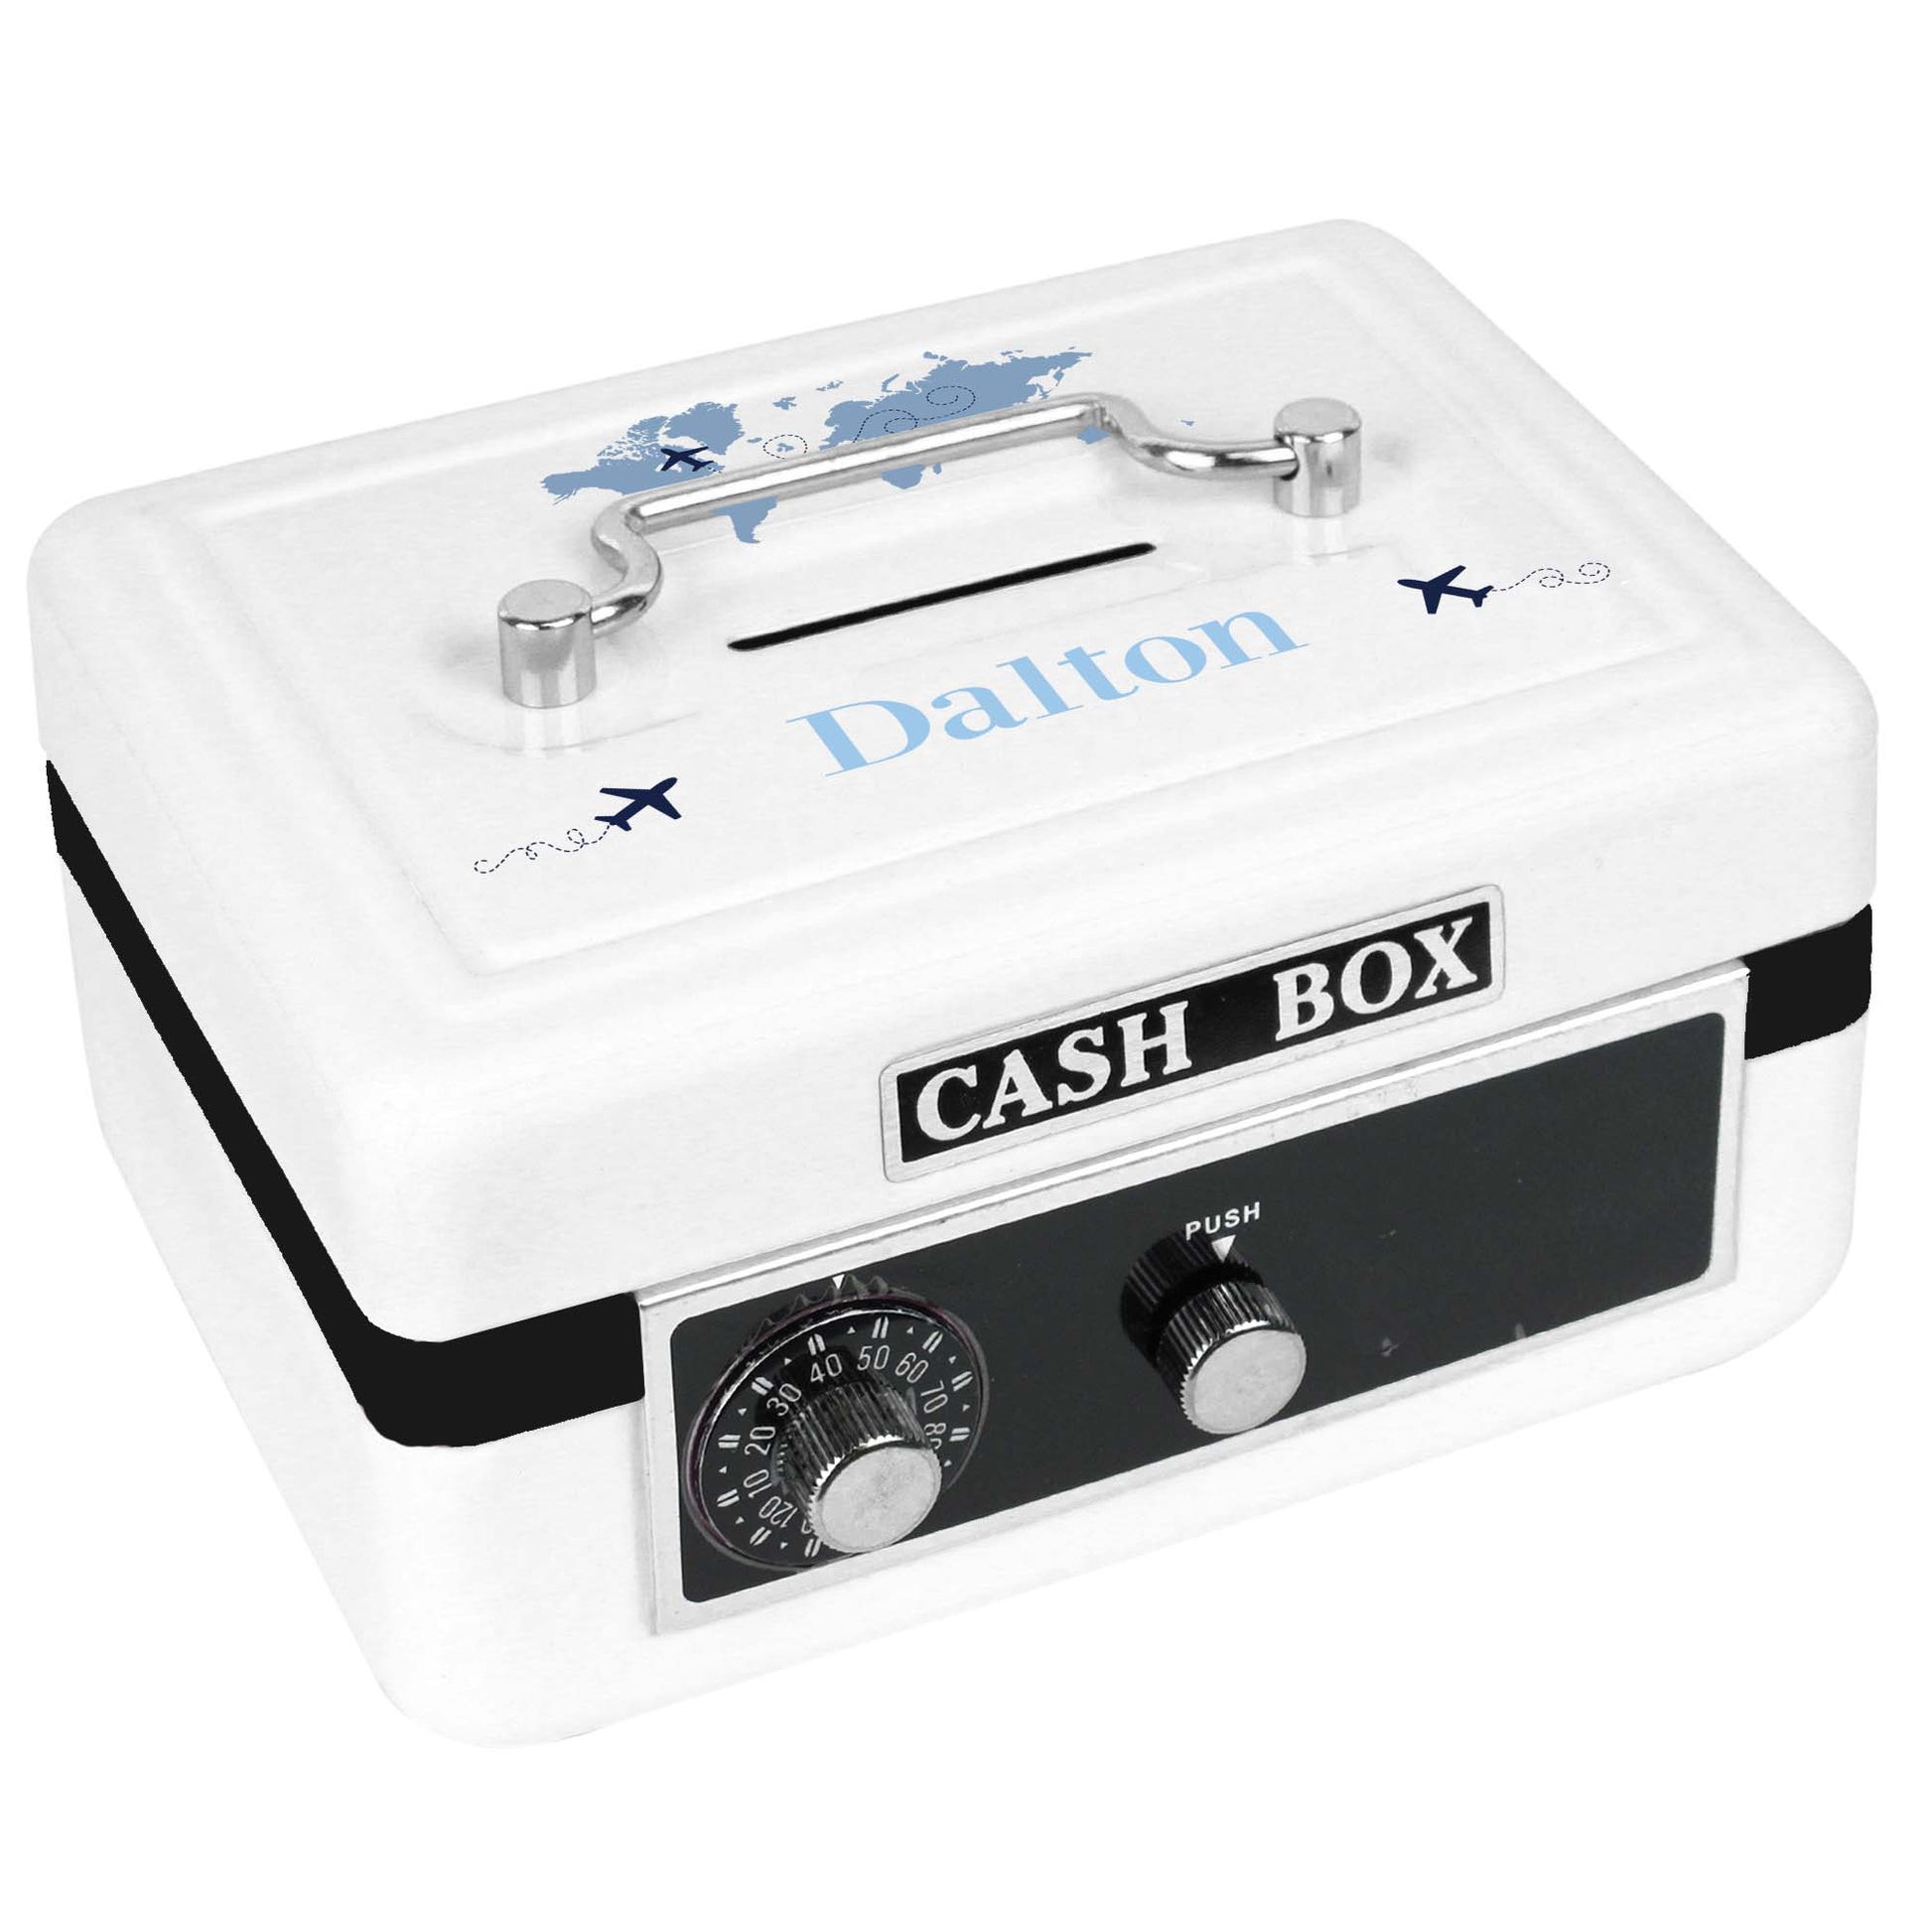 Personalized White Cash Box with World Map Blue design